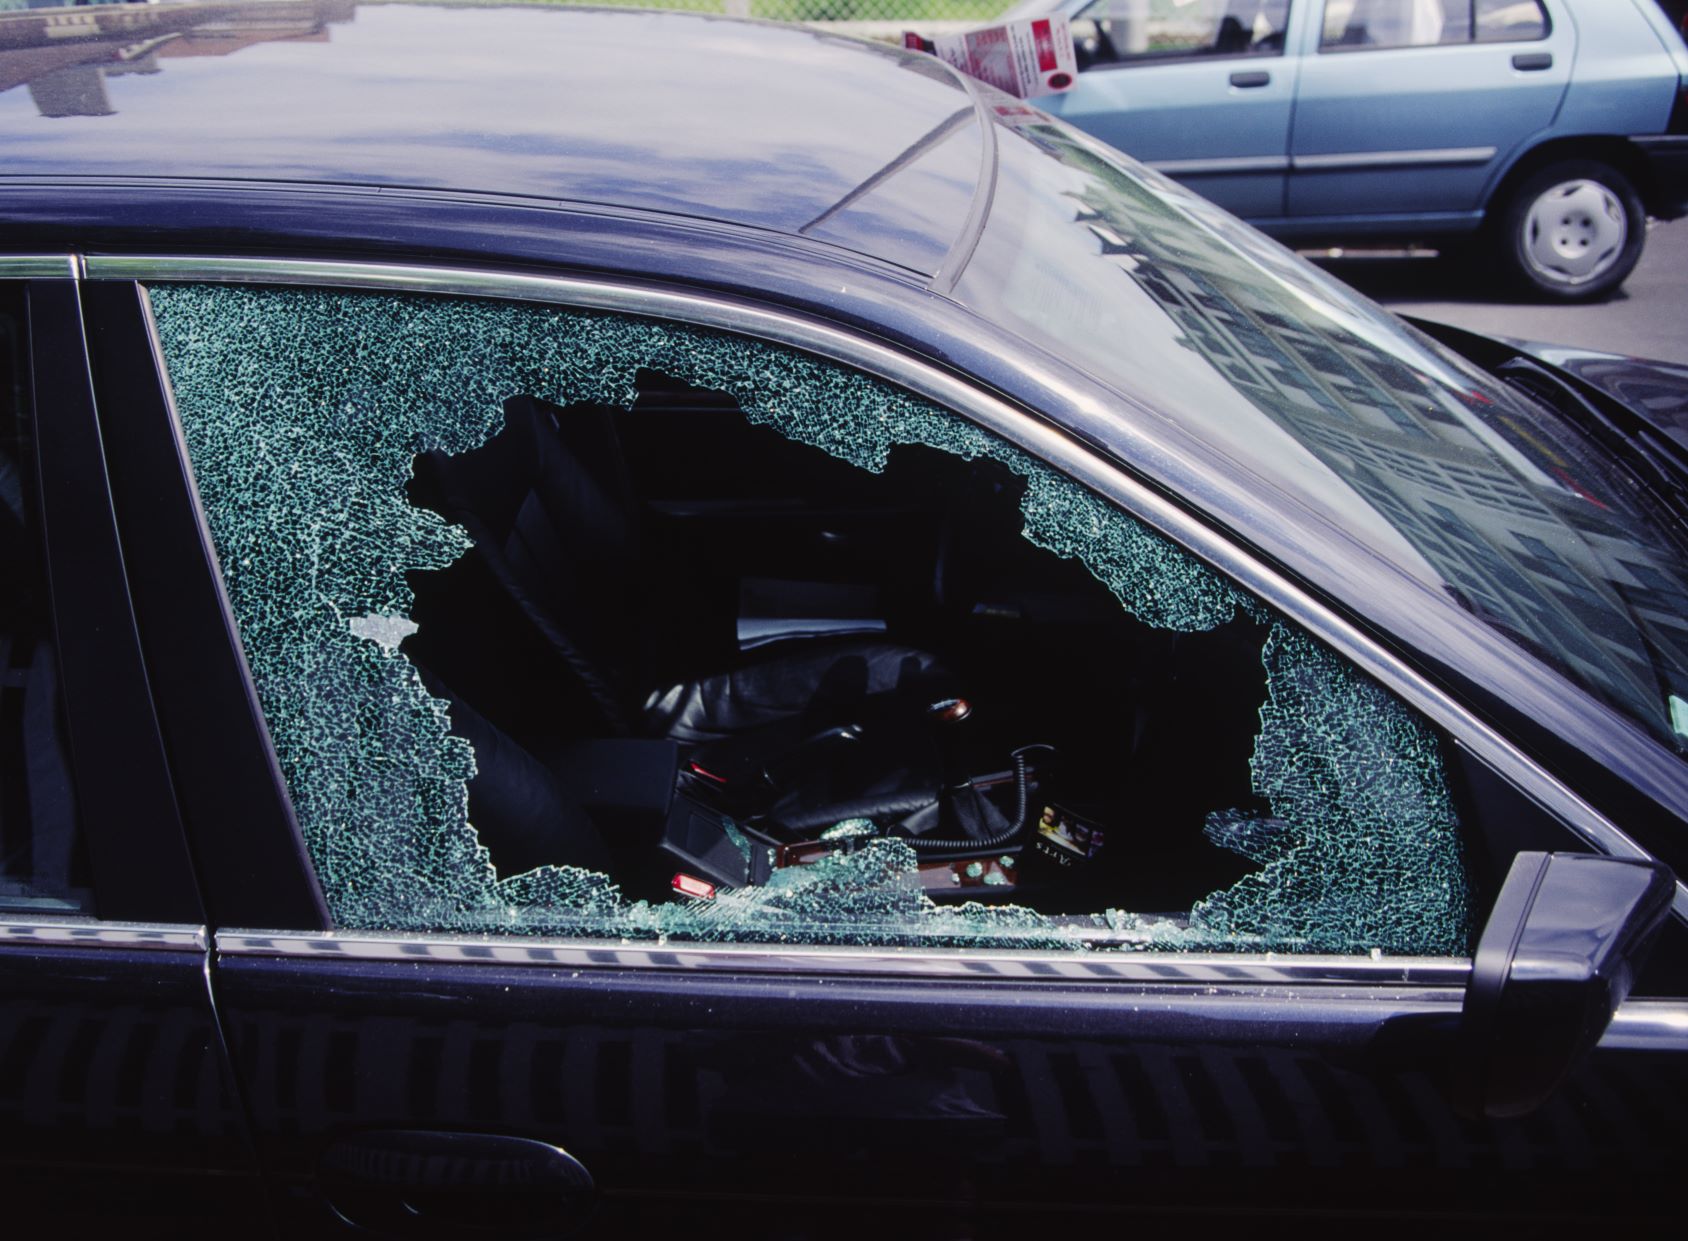 Protect your car from rising auto theft